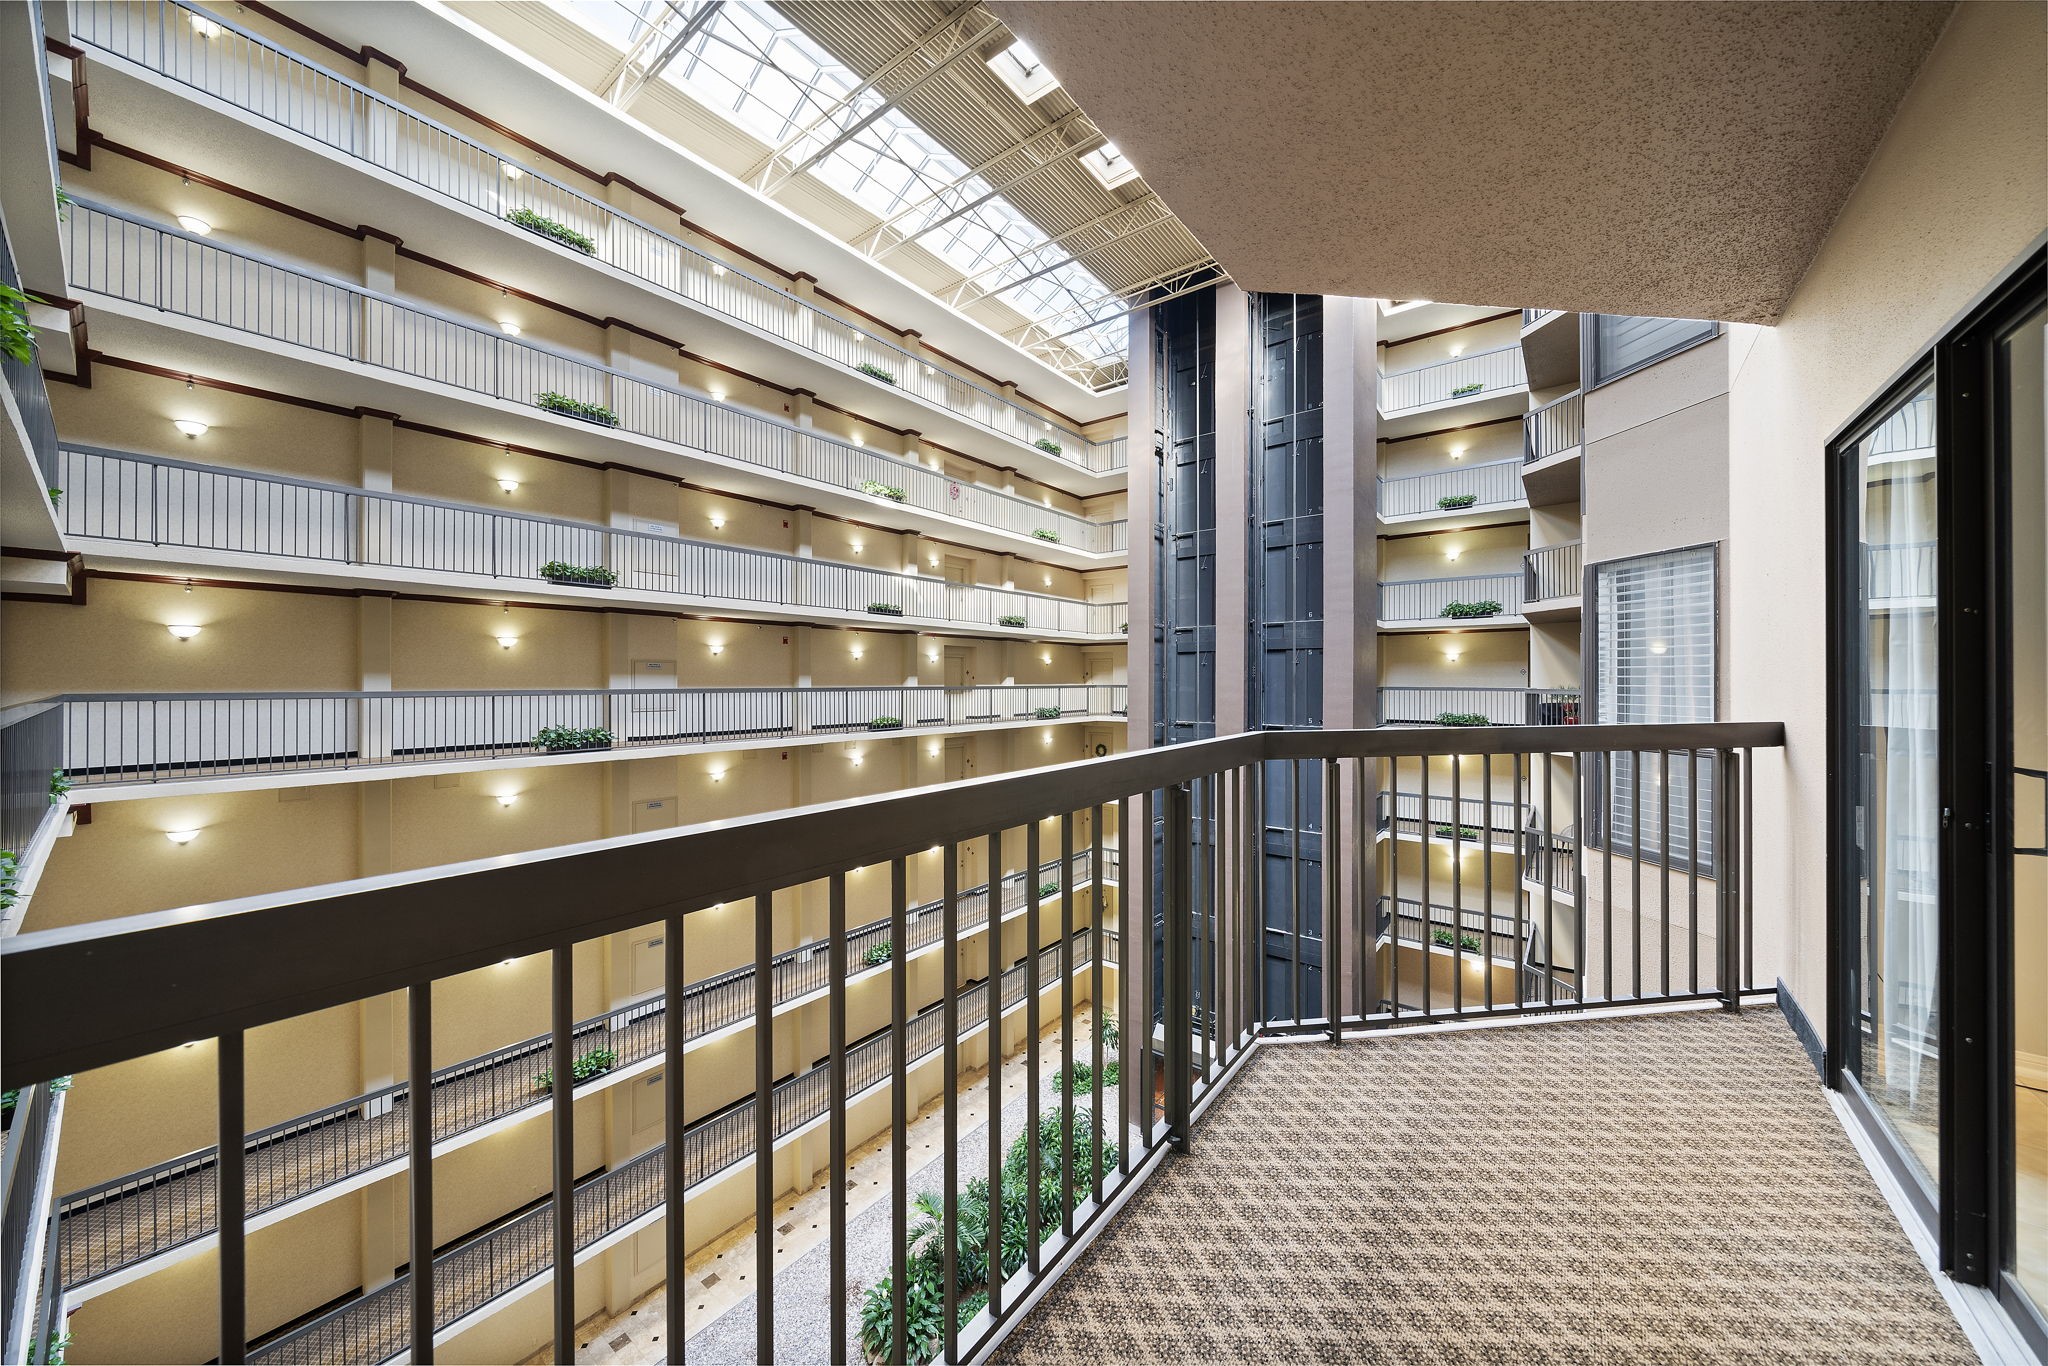 Interior balcony view of a multi-story atrium with natural light and lined with plants.